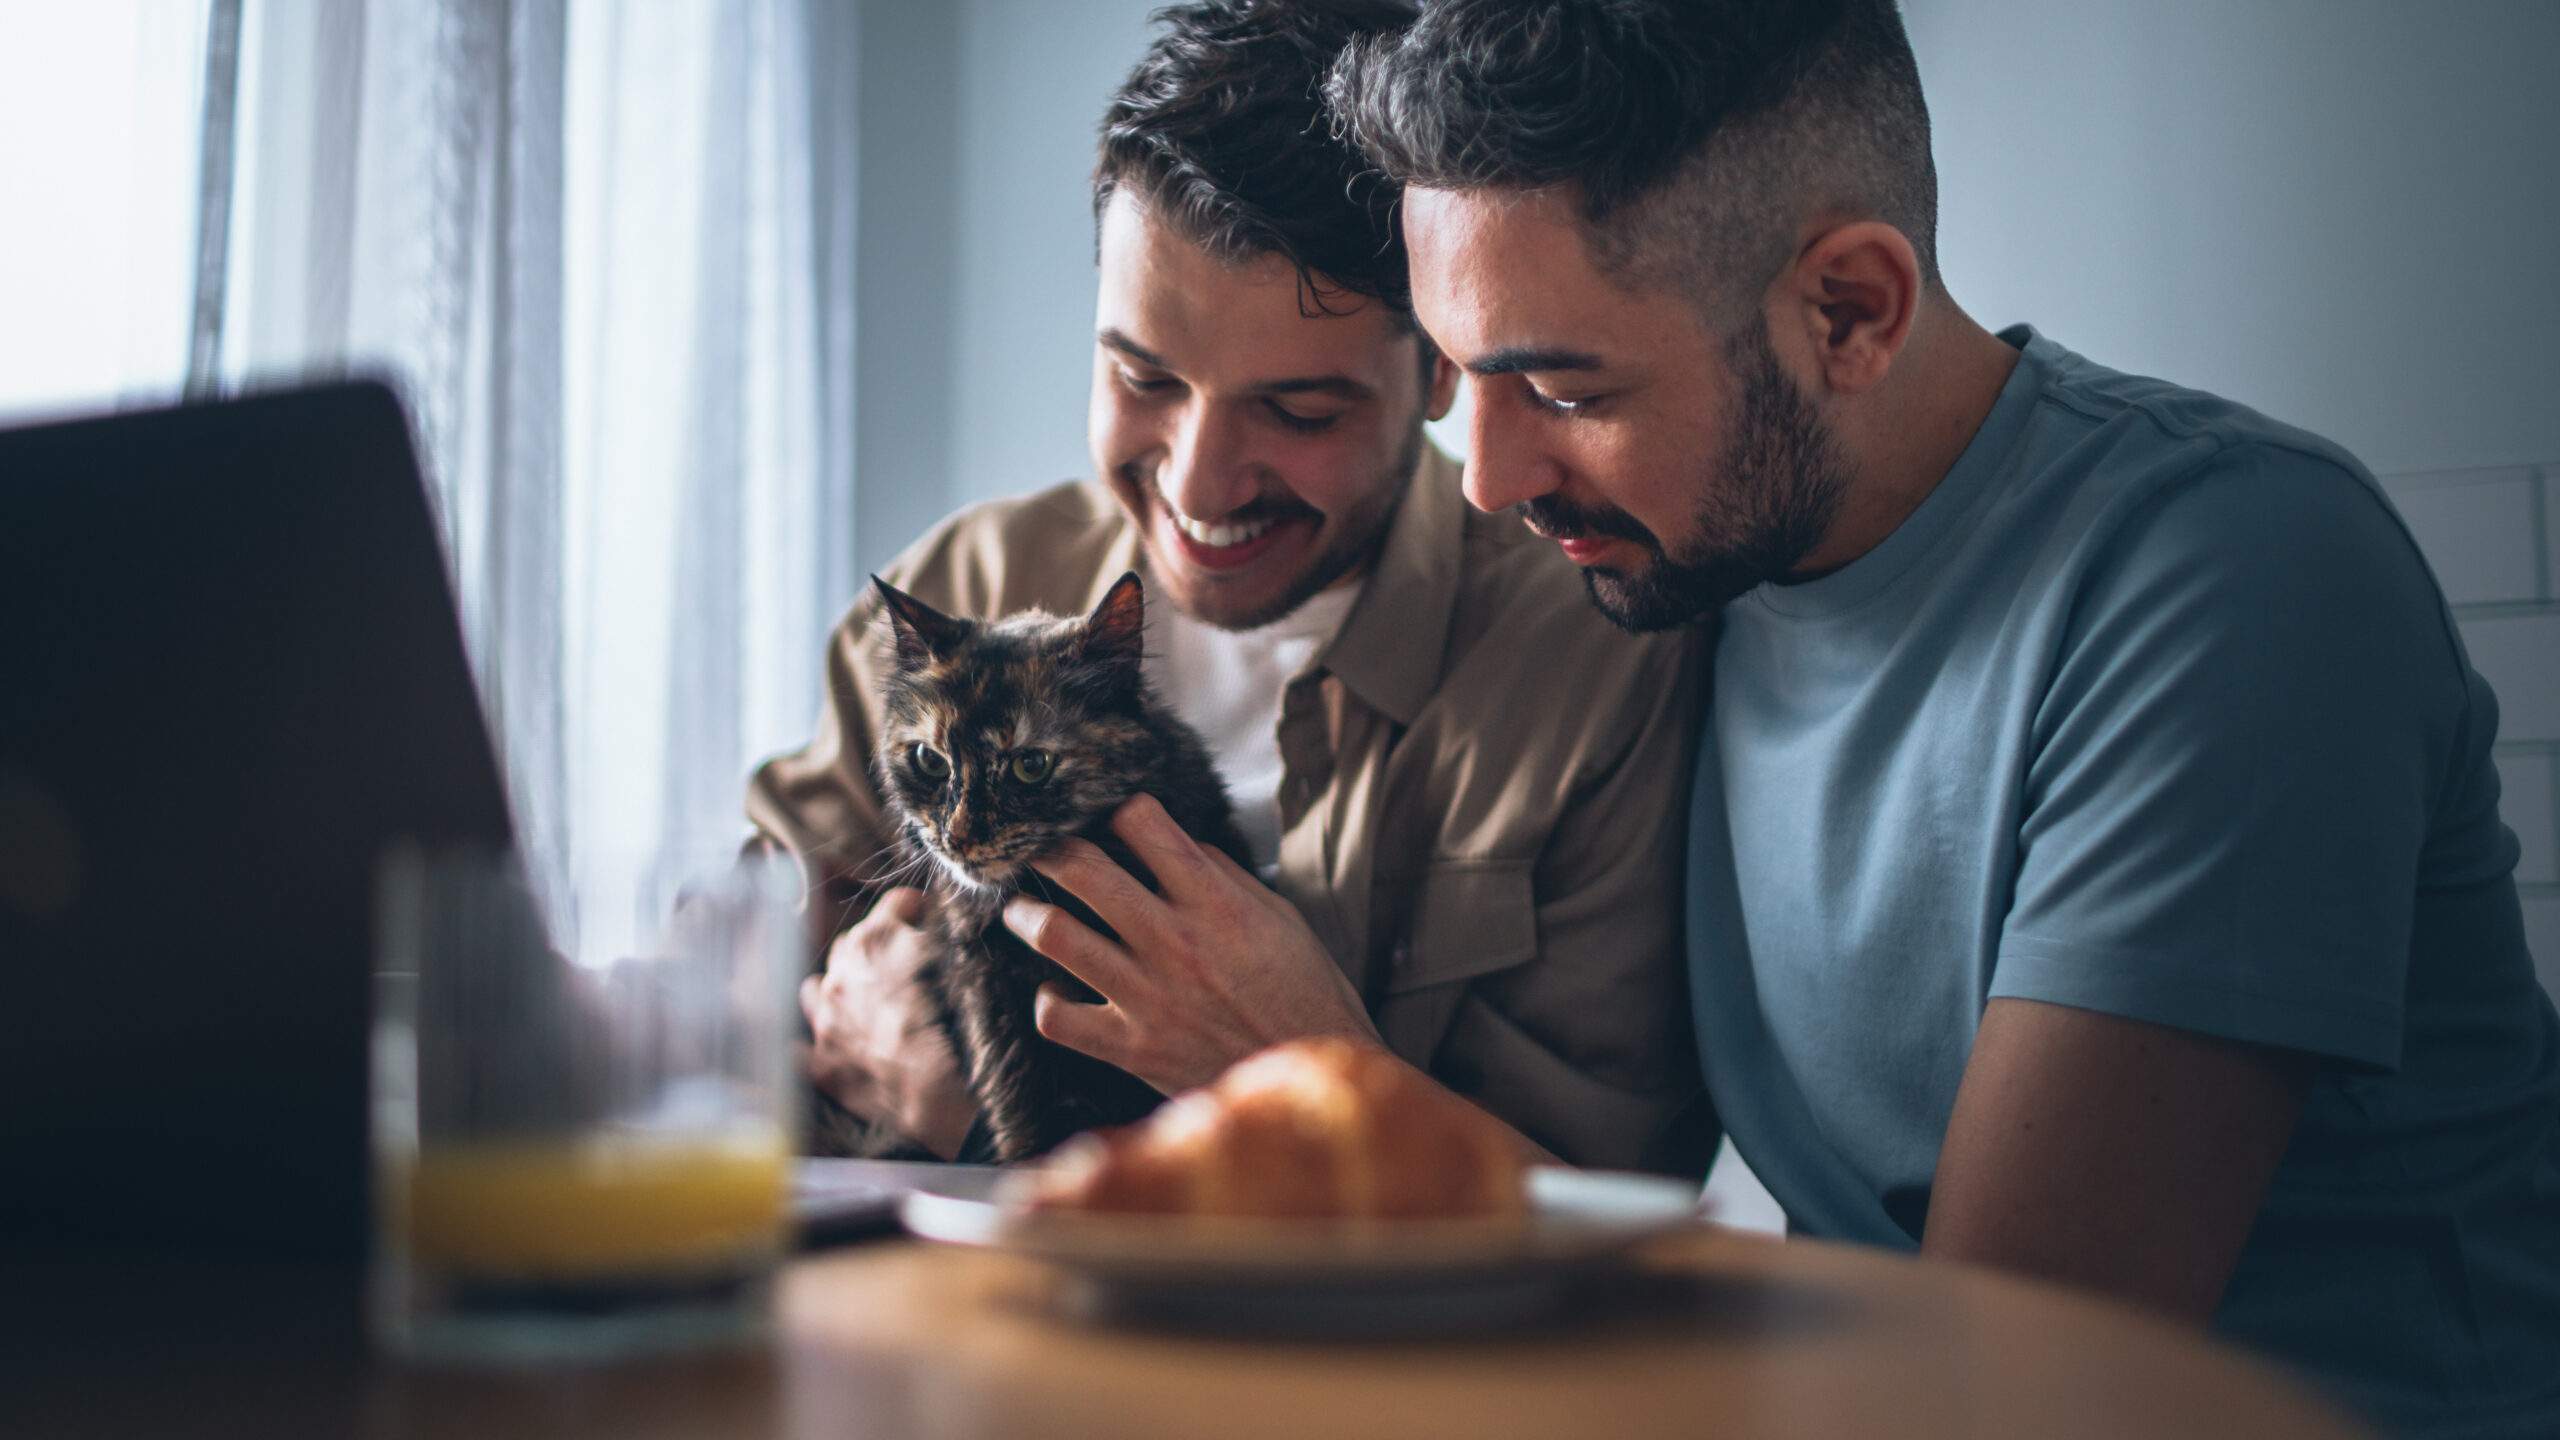 Insurance mortgage adviser Happy Gay Couple in Love Having Healthy Breakfast and Playing wi